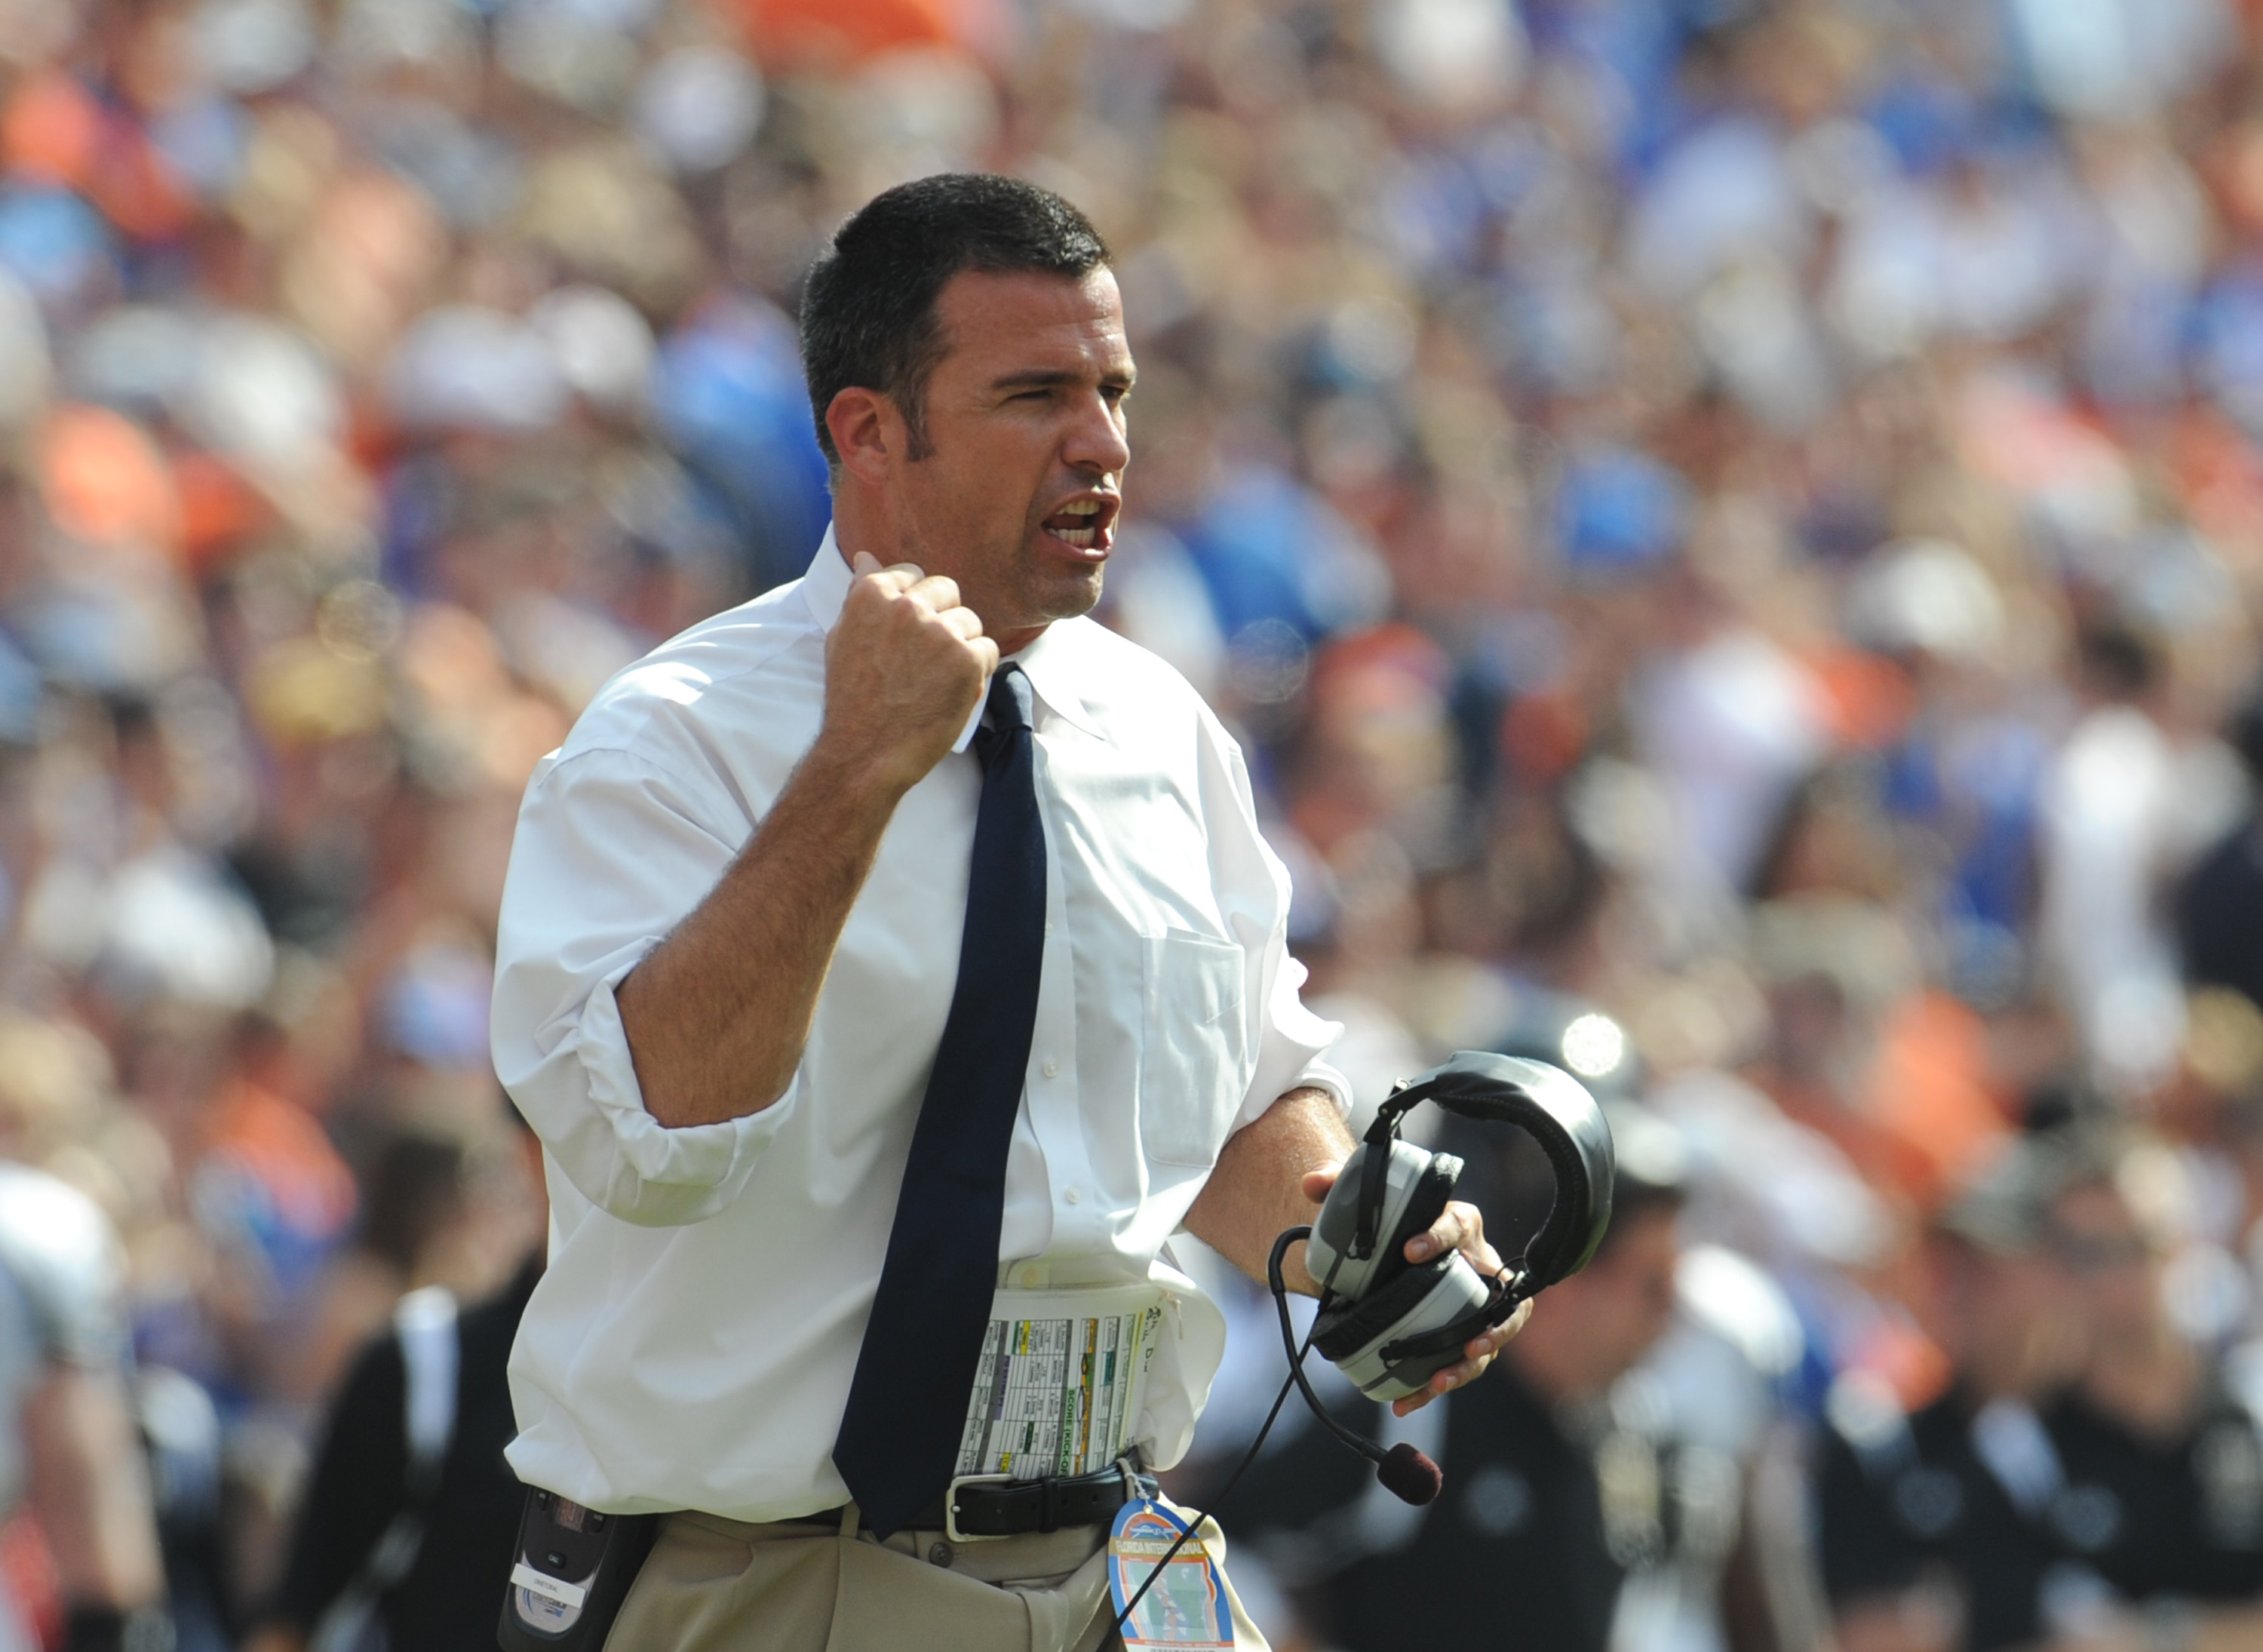 GAINESVILLE, FL - NOVEMBER 21: Coacg Mario Cristobal of the Florida International University Golden Panthers directs play against the Florida Gators, November 21, 2009 at Ben Hill Griffin Stadium in Gainesville, Florida.  (Photo by Al Messerschmidt/Getty